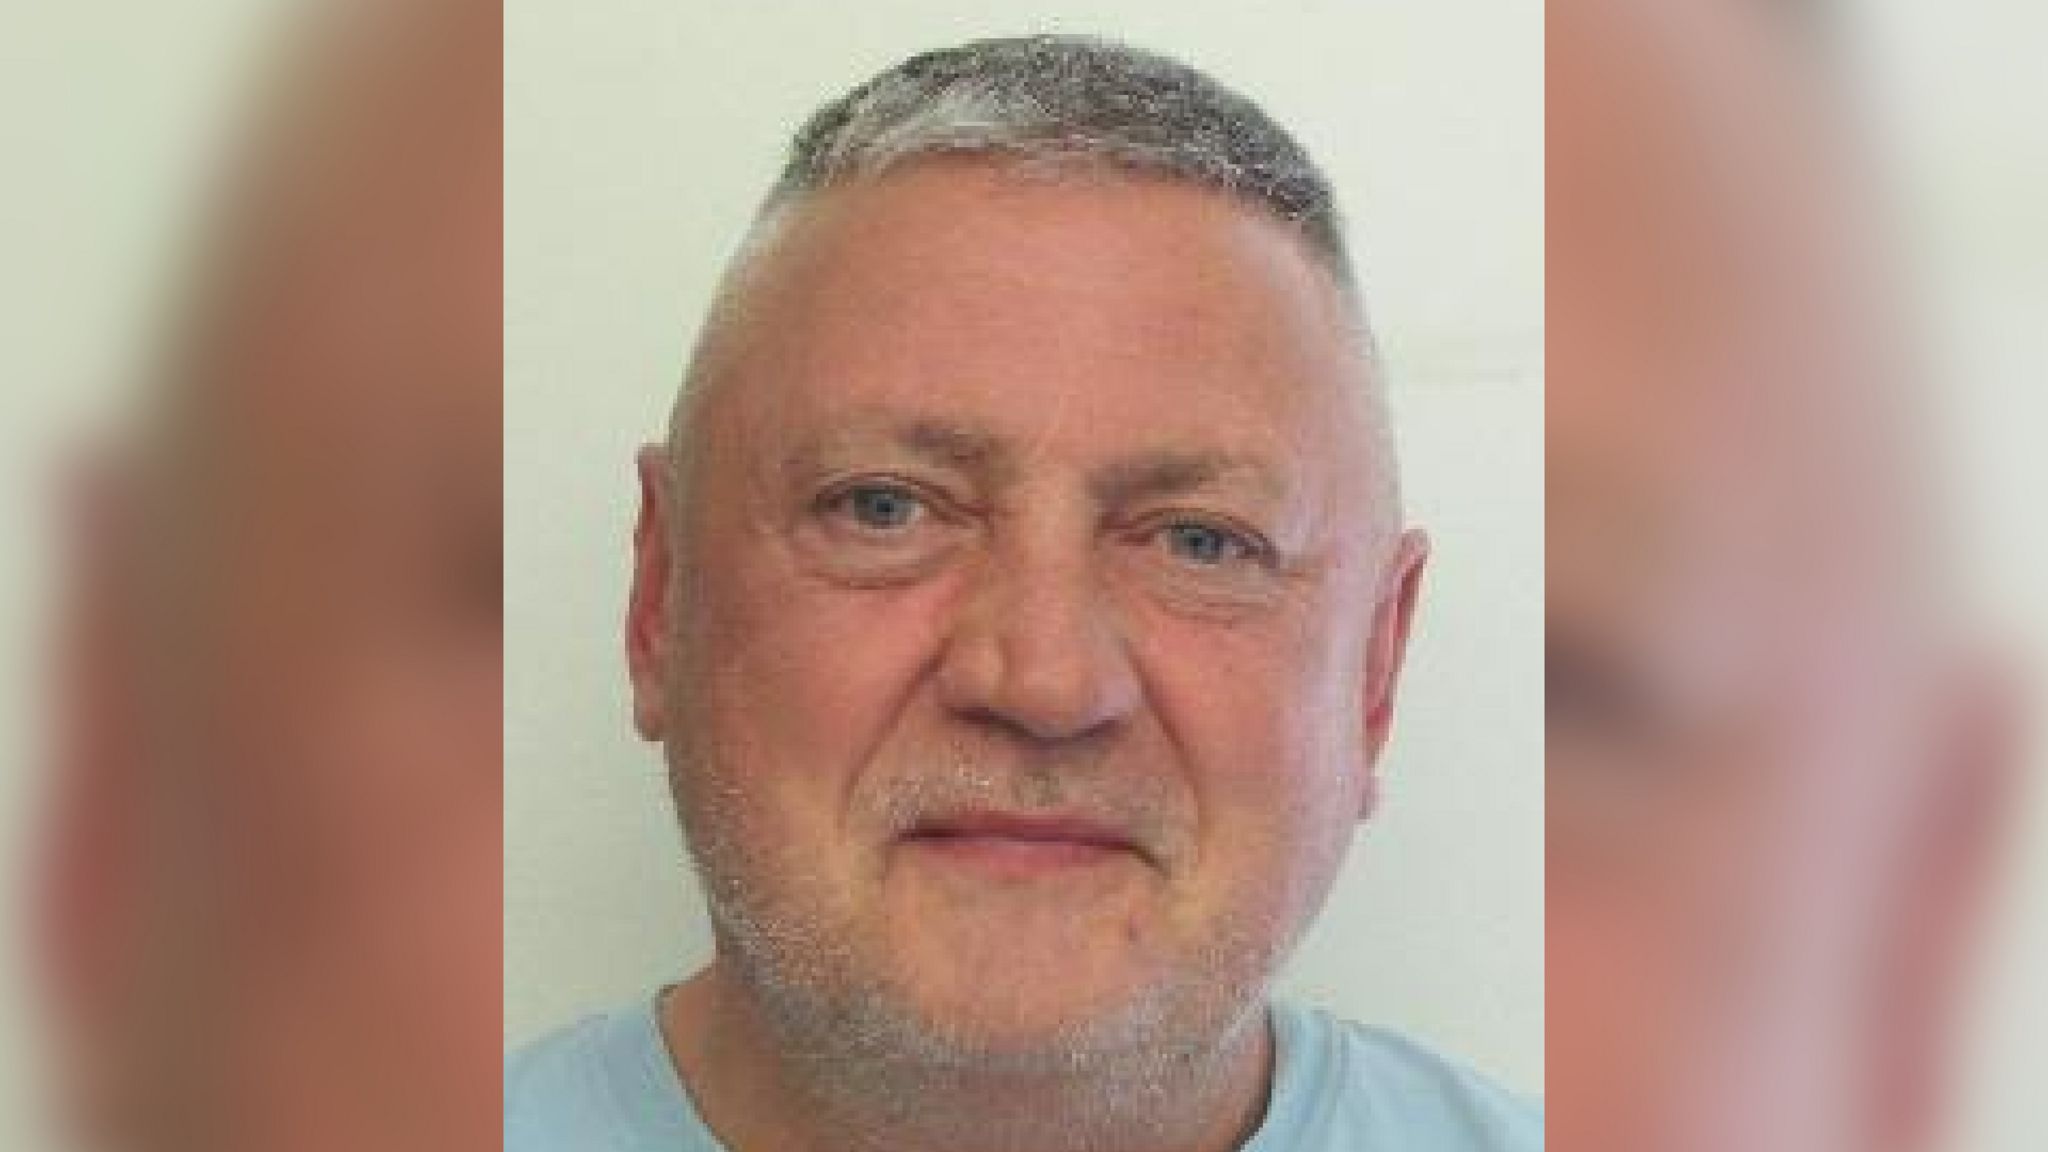 Gary Butcher has absconded from HMP North Sea Camp